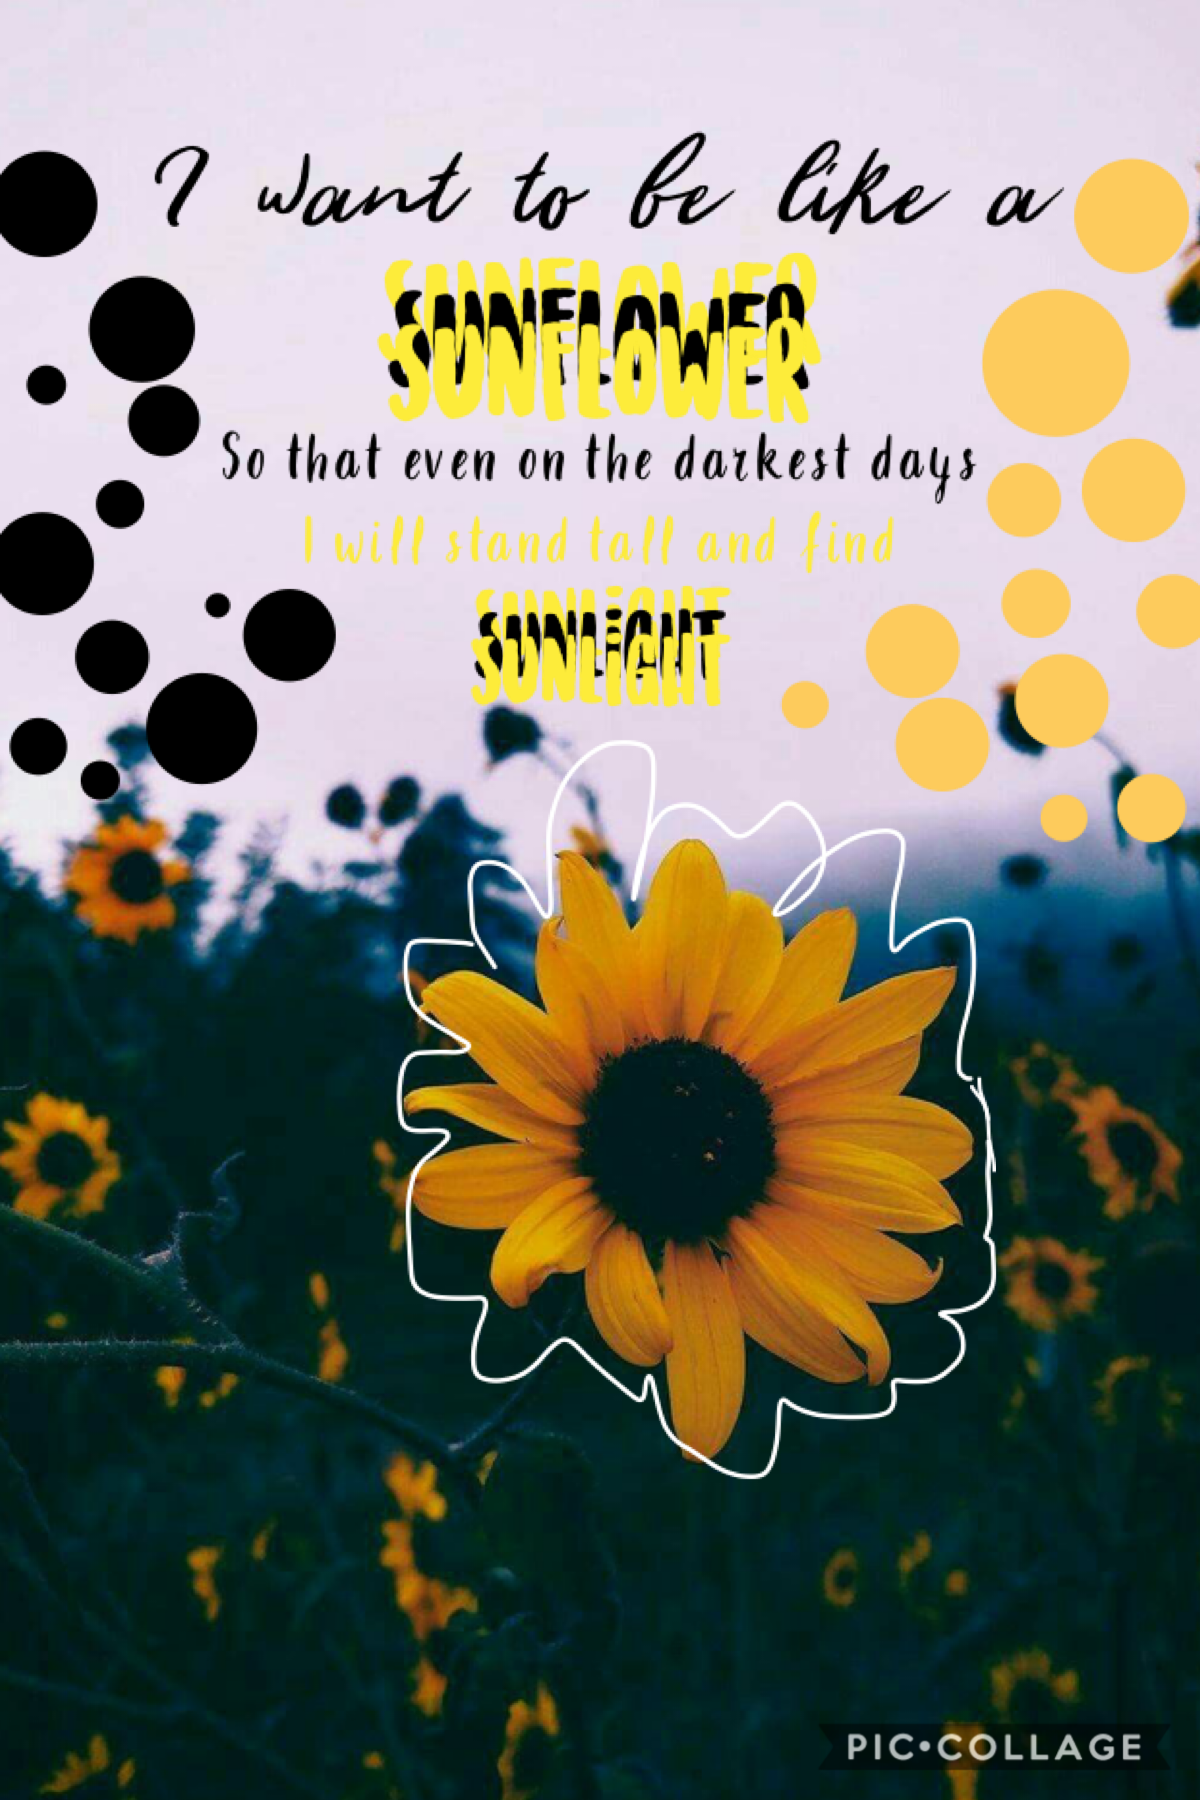 Tap the sunflower        🌻 
I love this colageee! What do you think? It’s my first collage since the beach theme🥳
28-06-2020